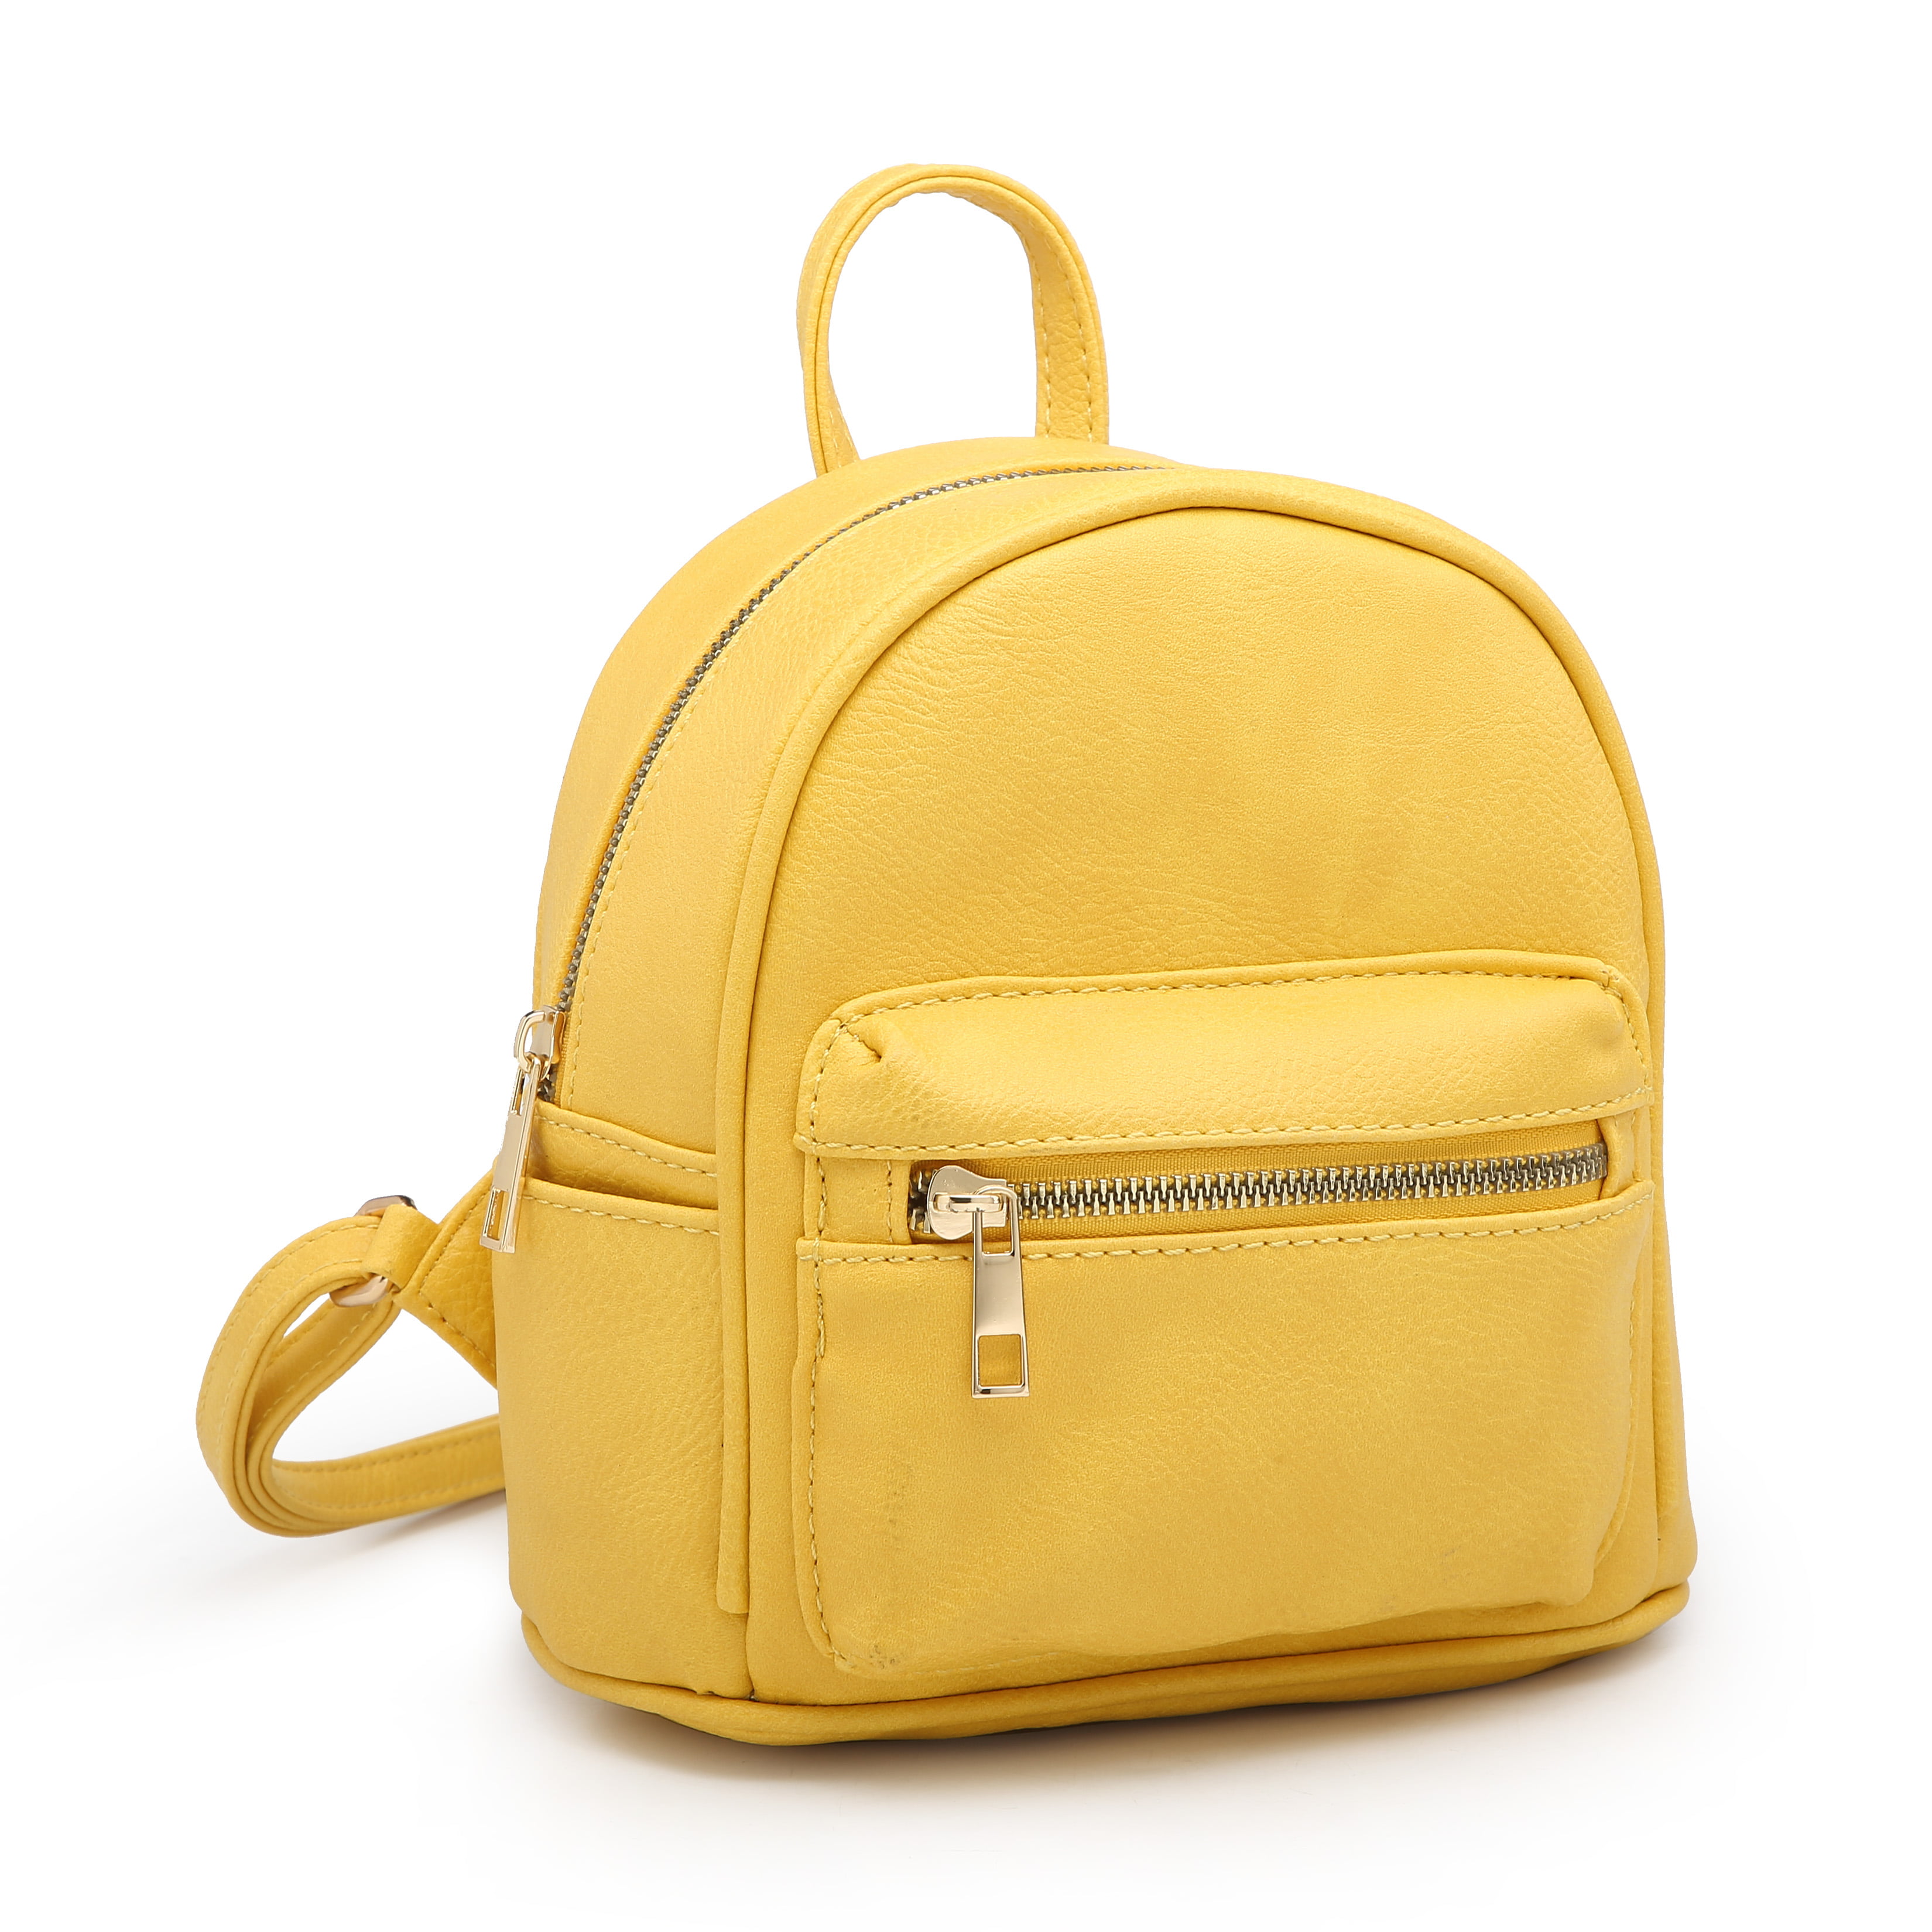 Leather Yellow Gold Dogs On Dark Backpack Daypack Bag Women